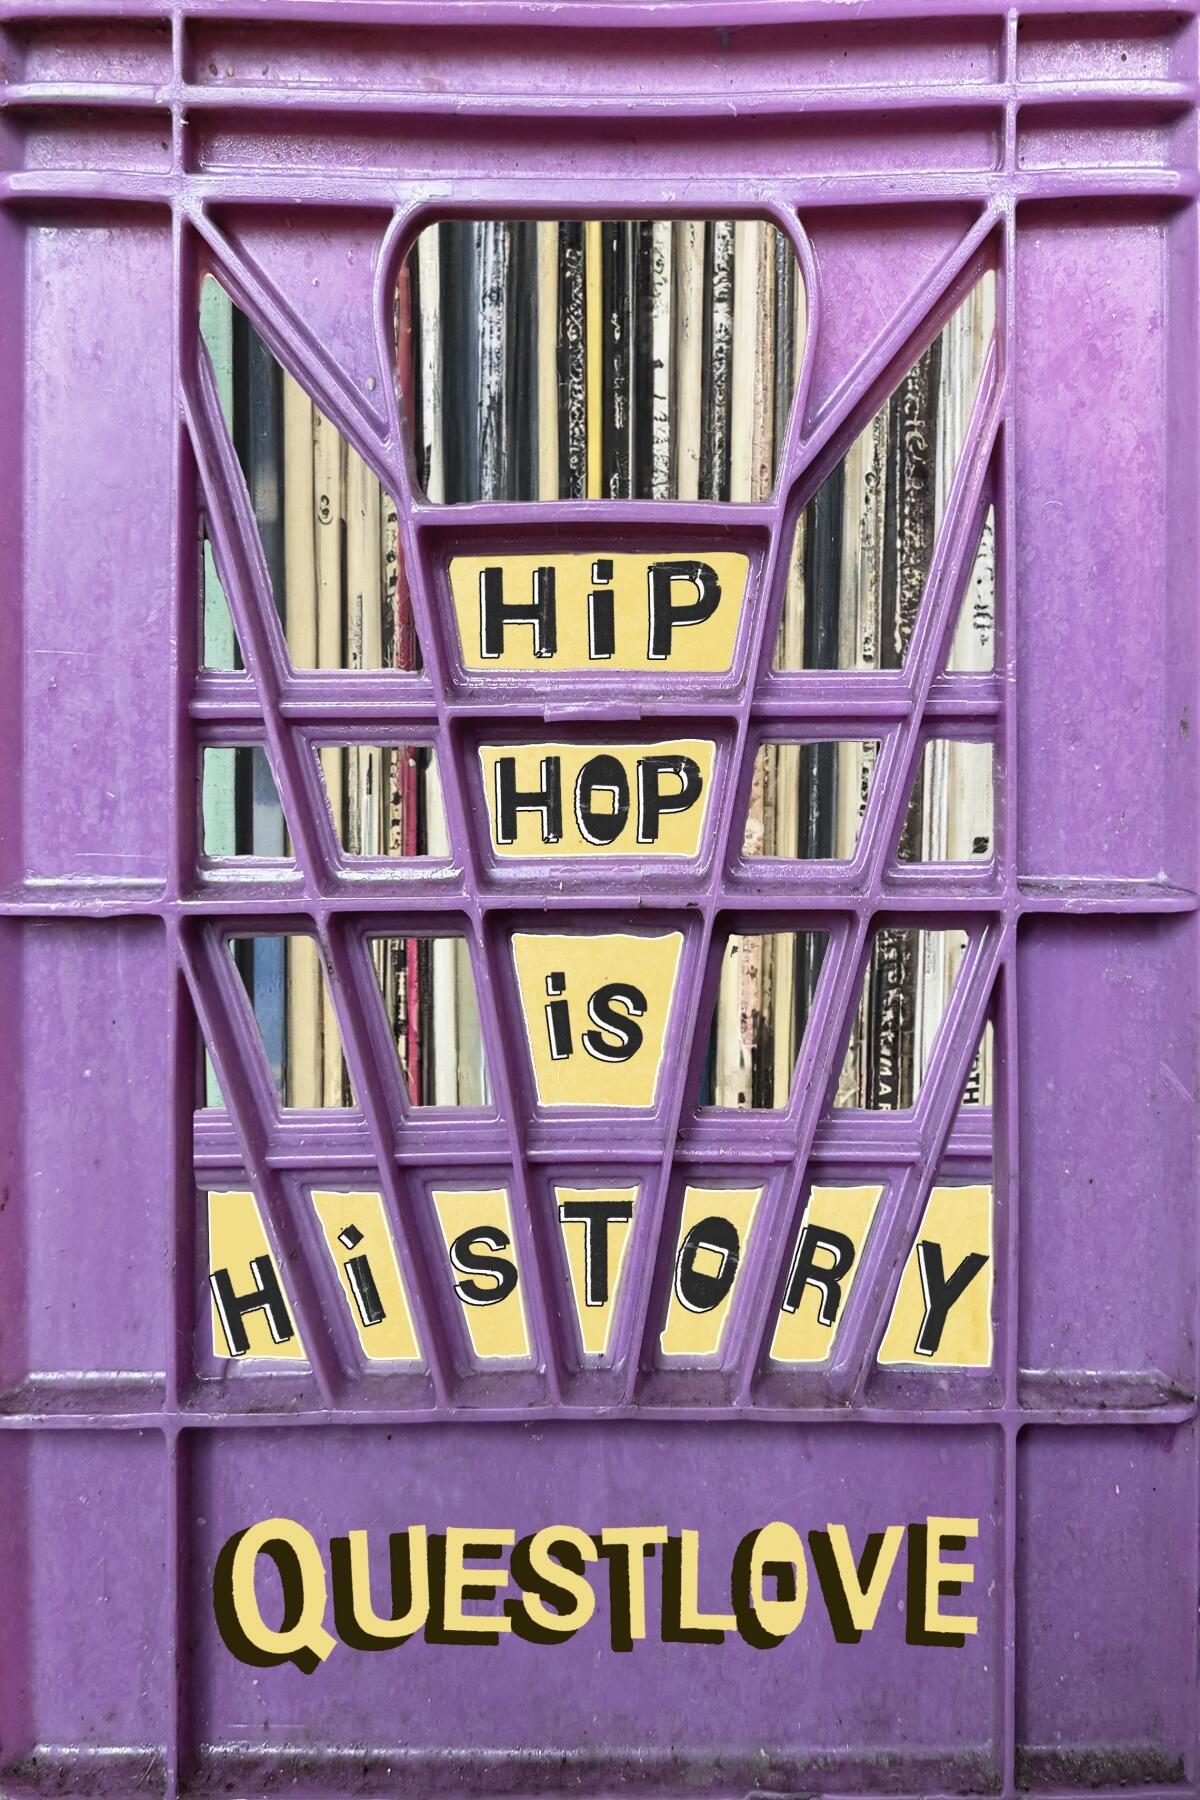 A purple book cover with the title. "Hip hop is history." by questlove